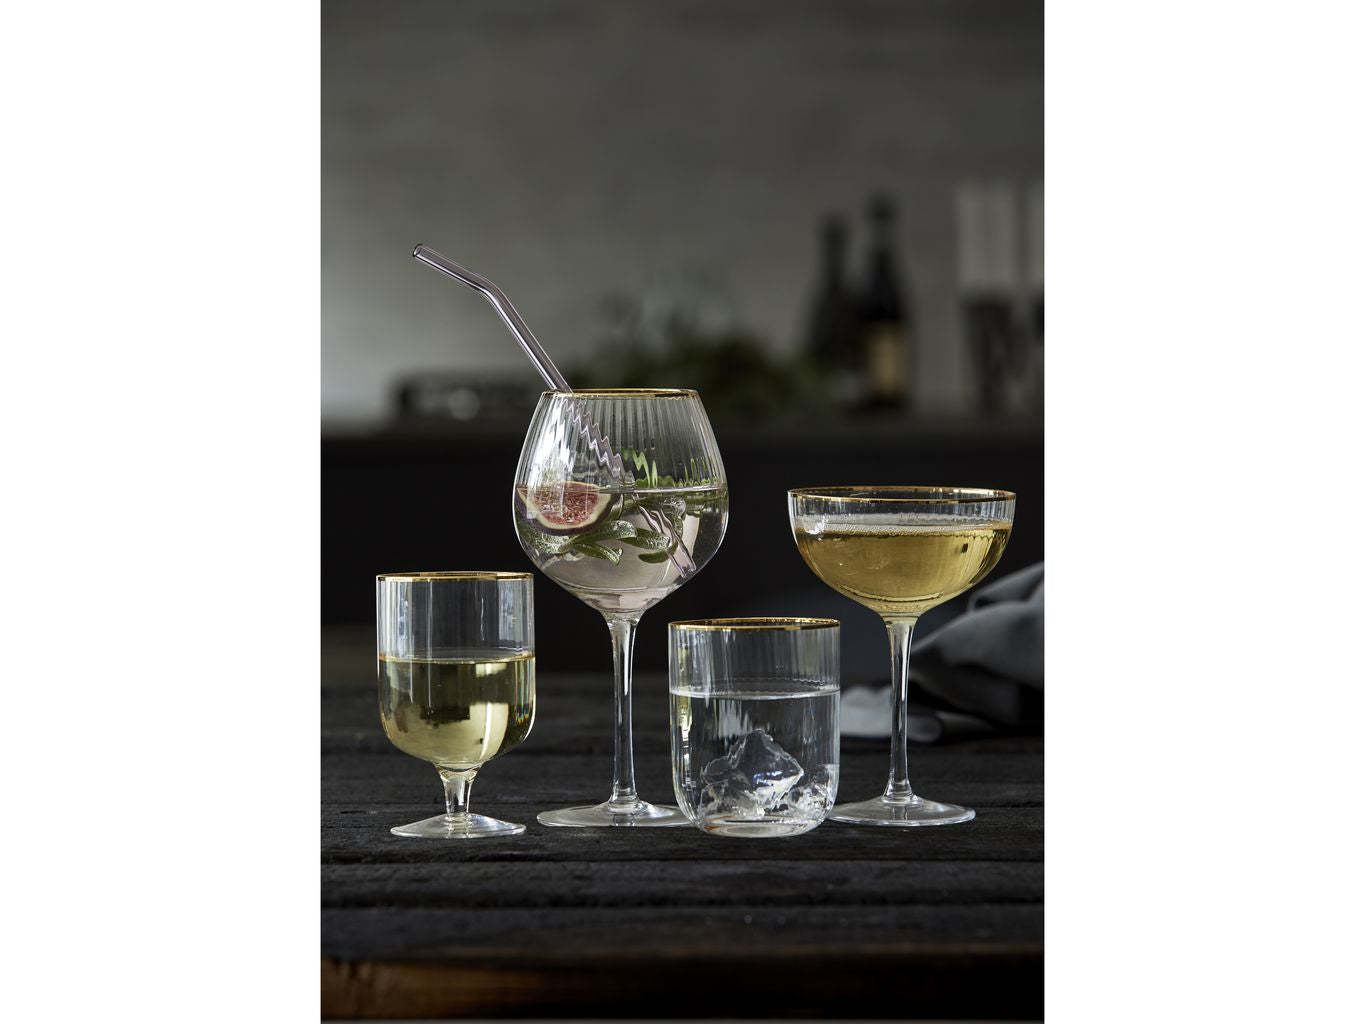 Lyngby Glas Palermo Gold Cocktail Glasses 31,5 Cl, 4 Pcs.